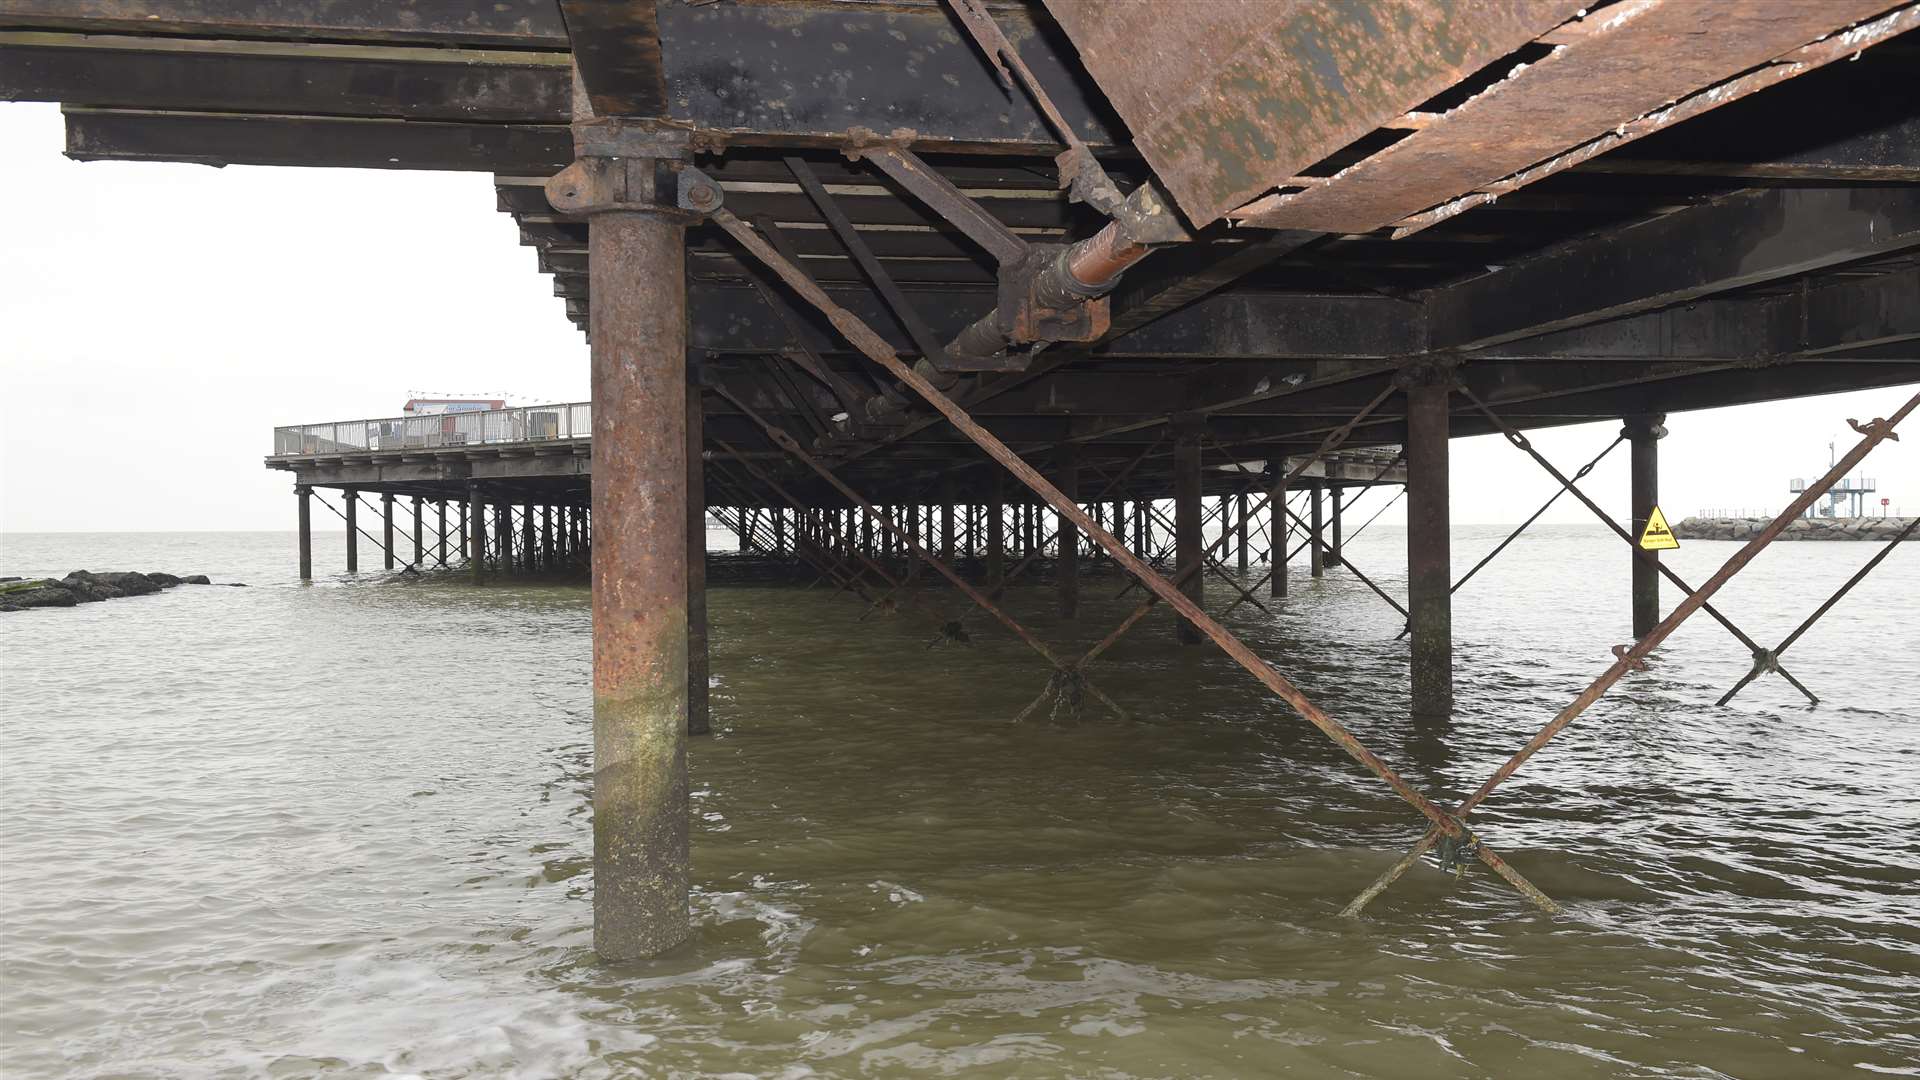 Andy Newell fears the pier may collapse within 50 years unless works are carried out